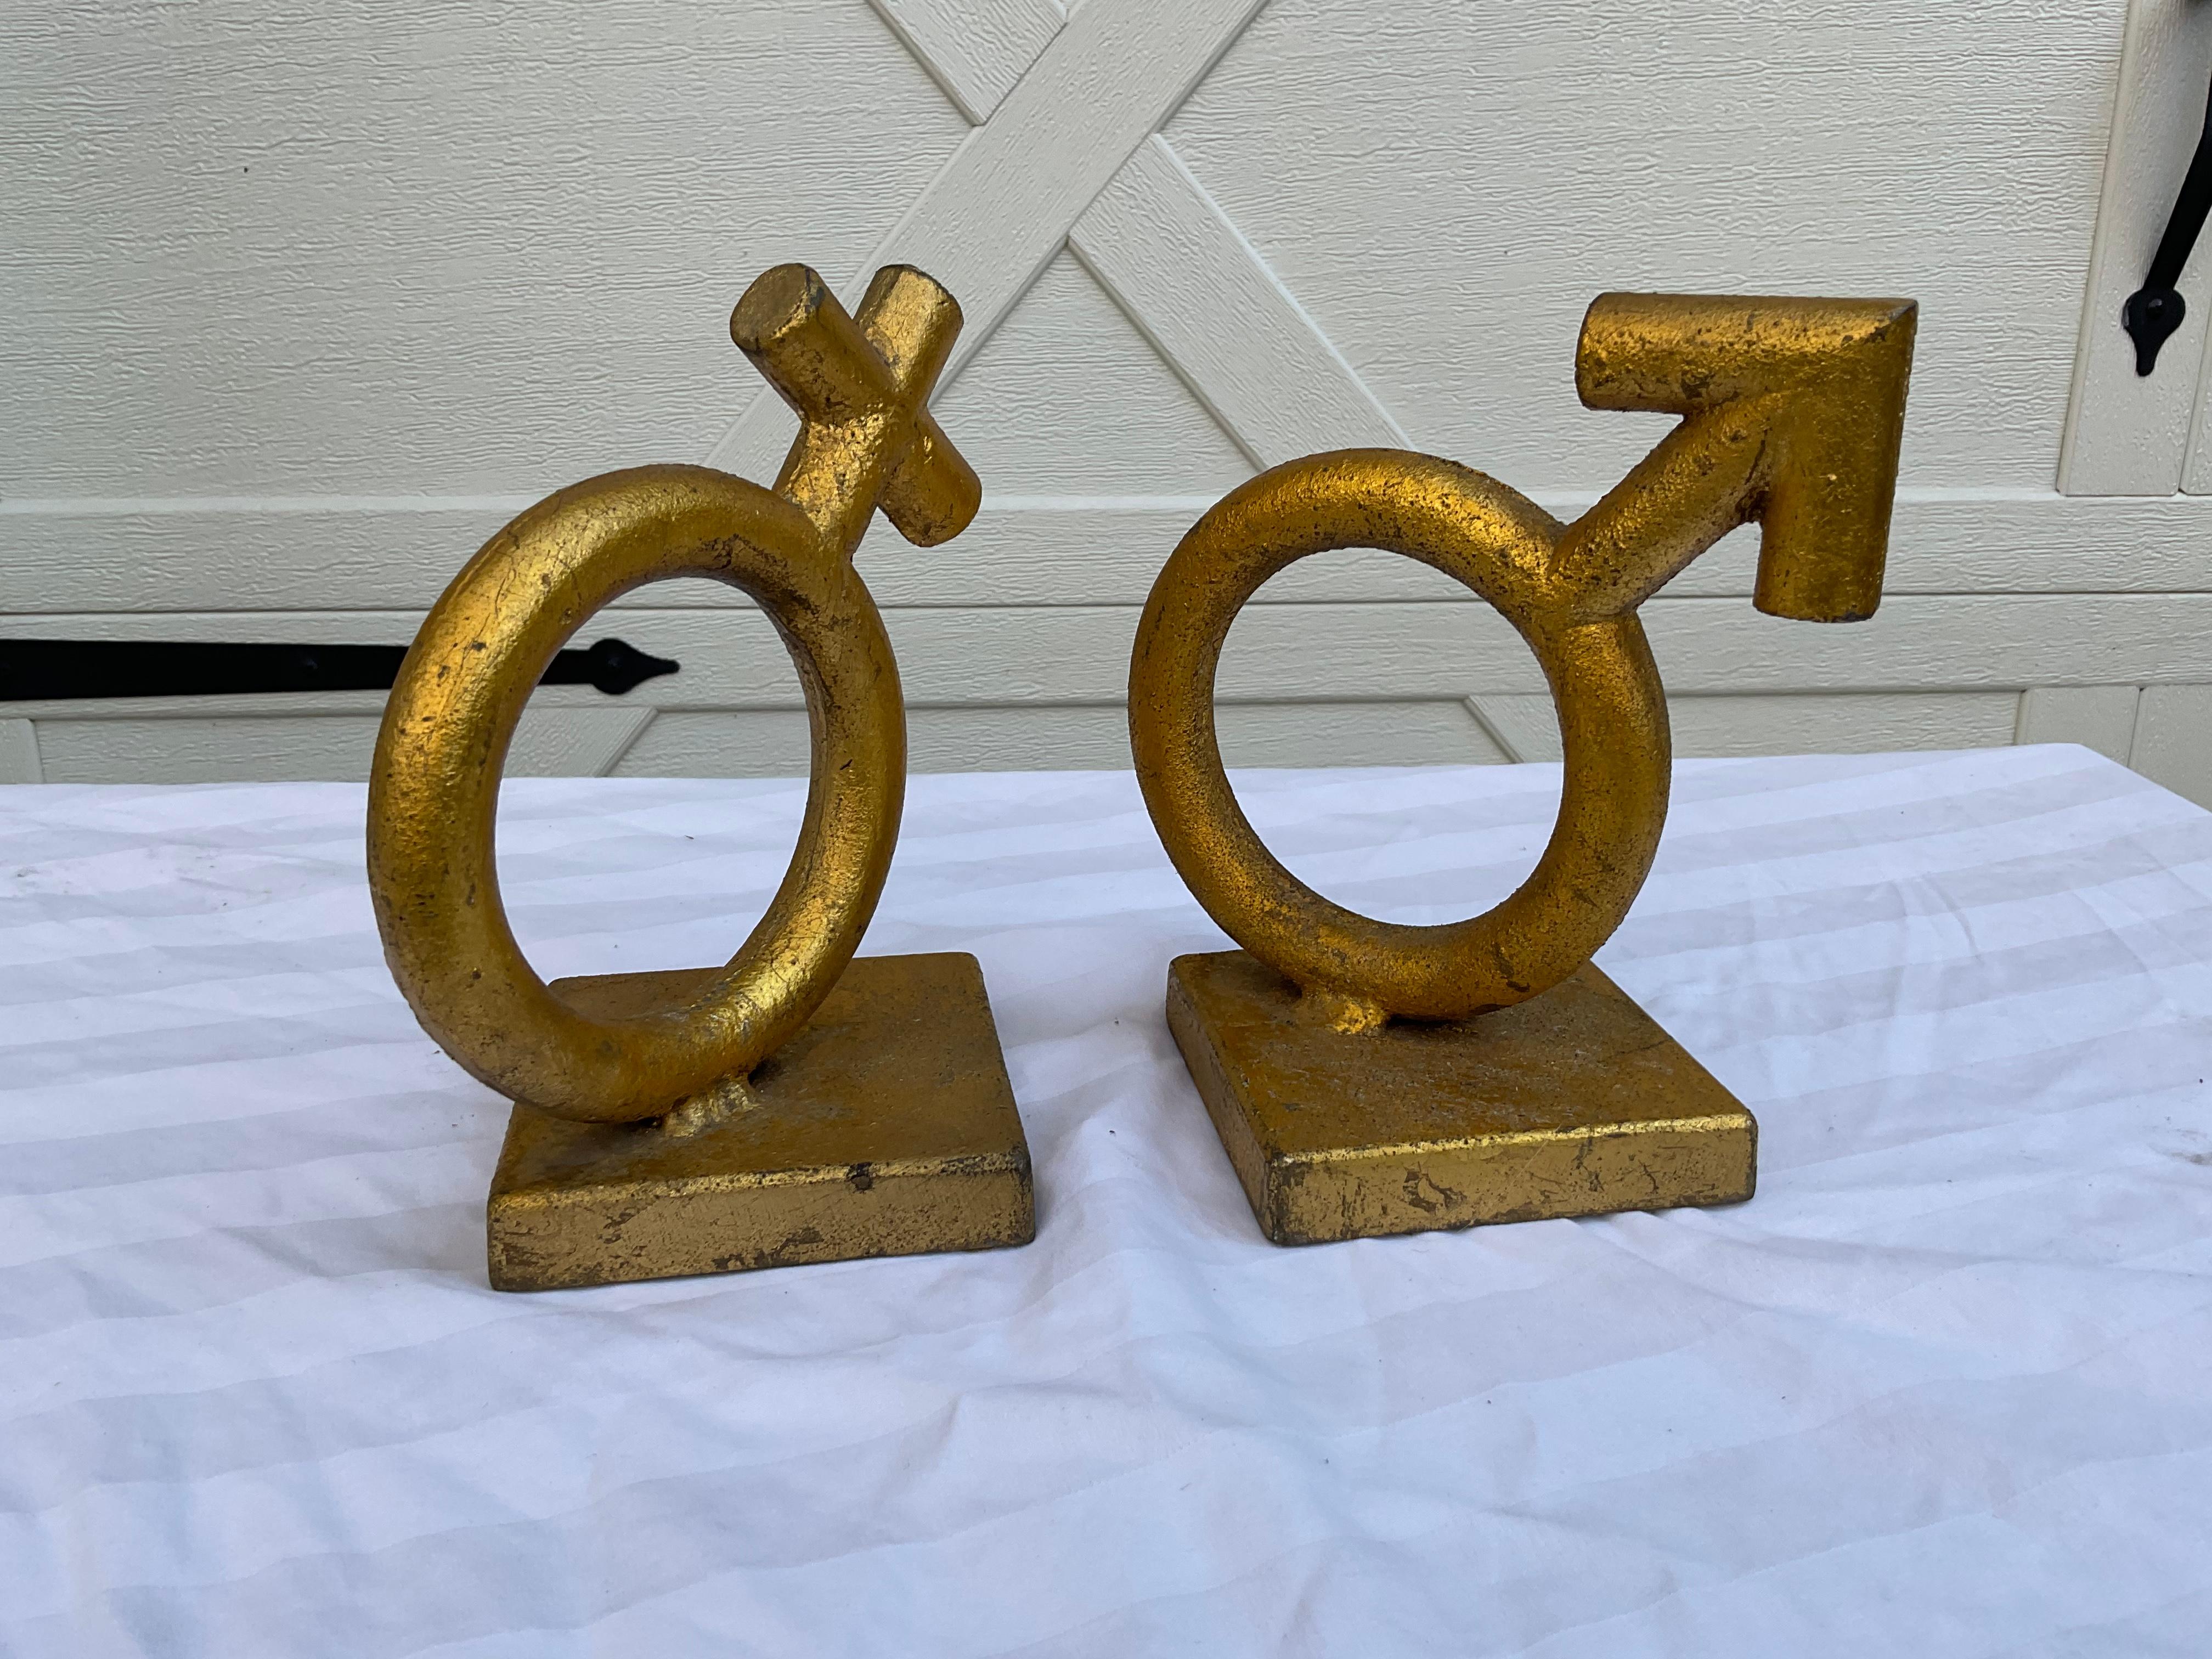 1968 Curtis Jere Male and Female Bookends, a Pair In Good Condition For Sale In Marietta, GA